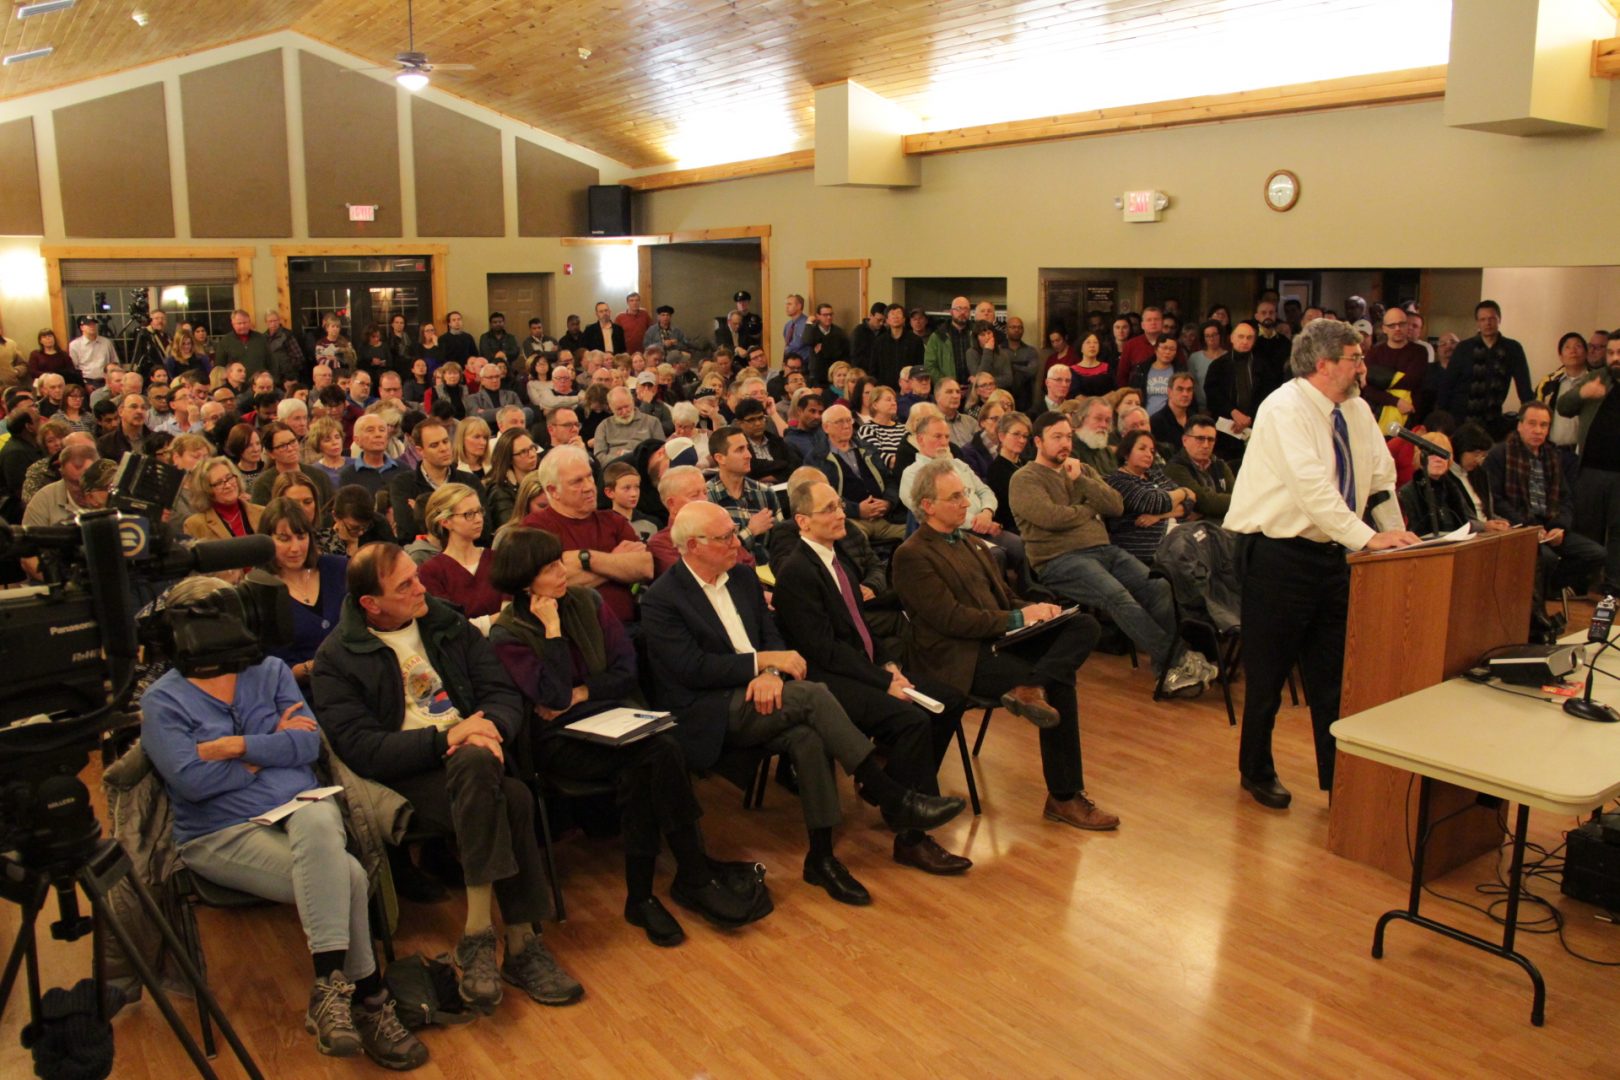 People packed a room for a public hearing on fracking in Franklin Park, Pa. on Monday, Jan. 14.